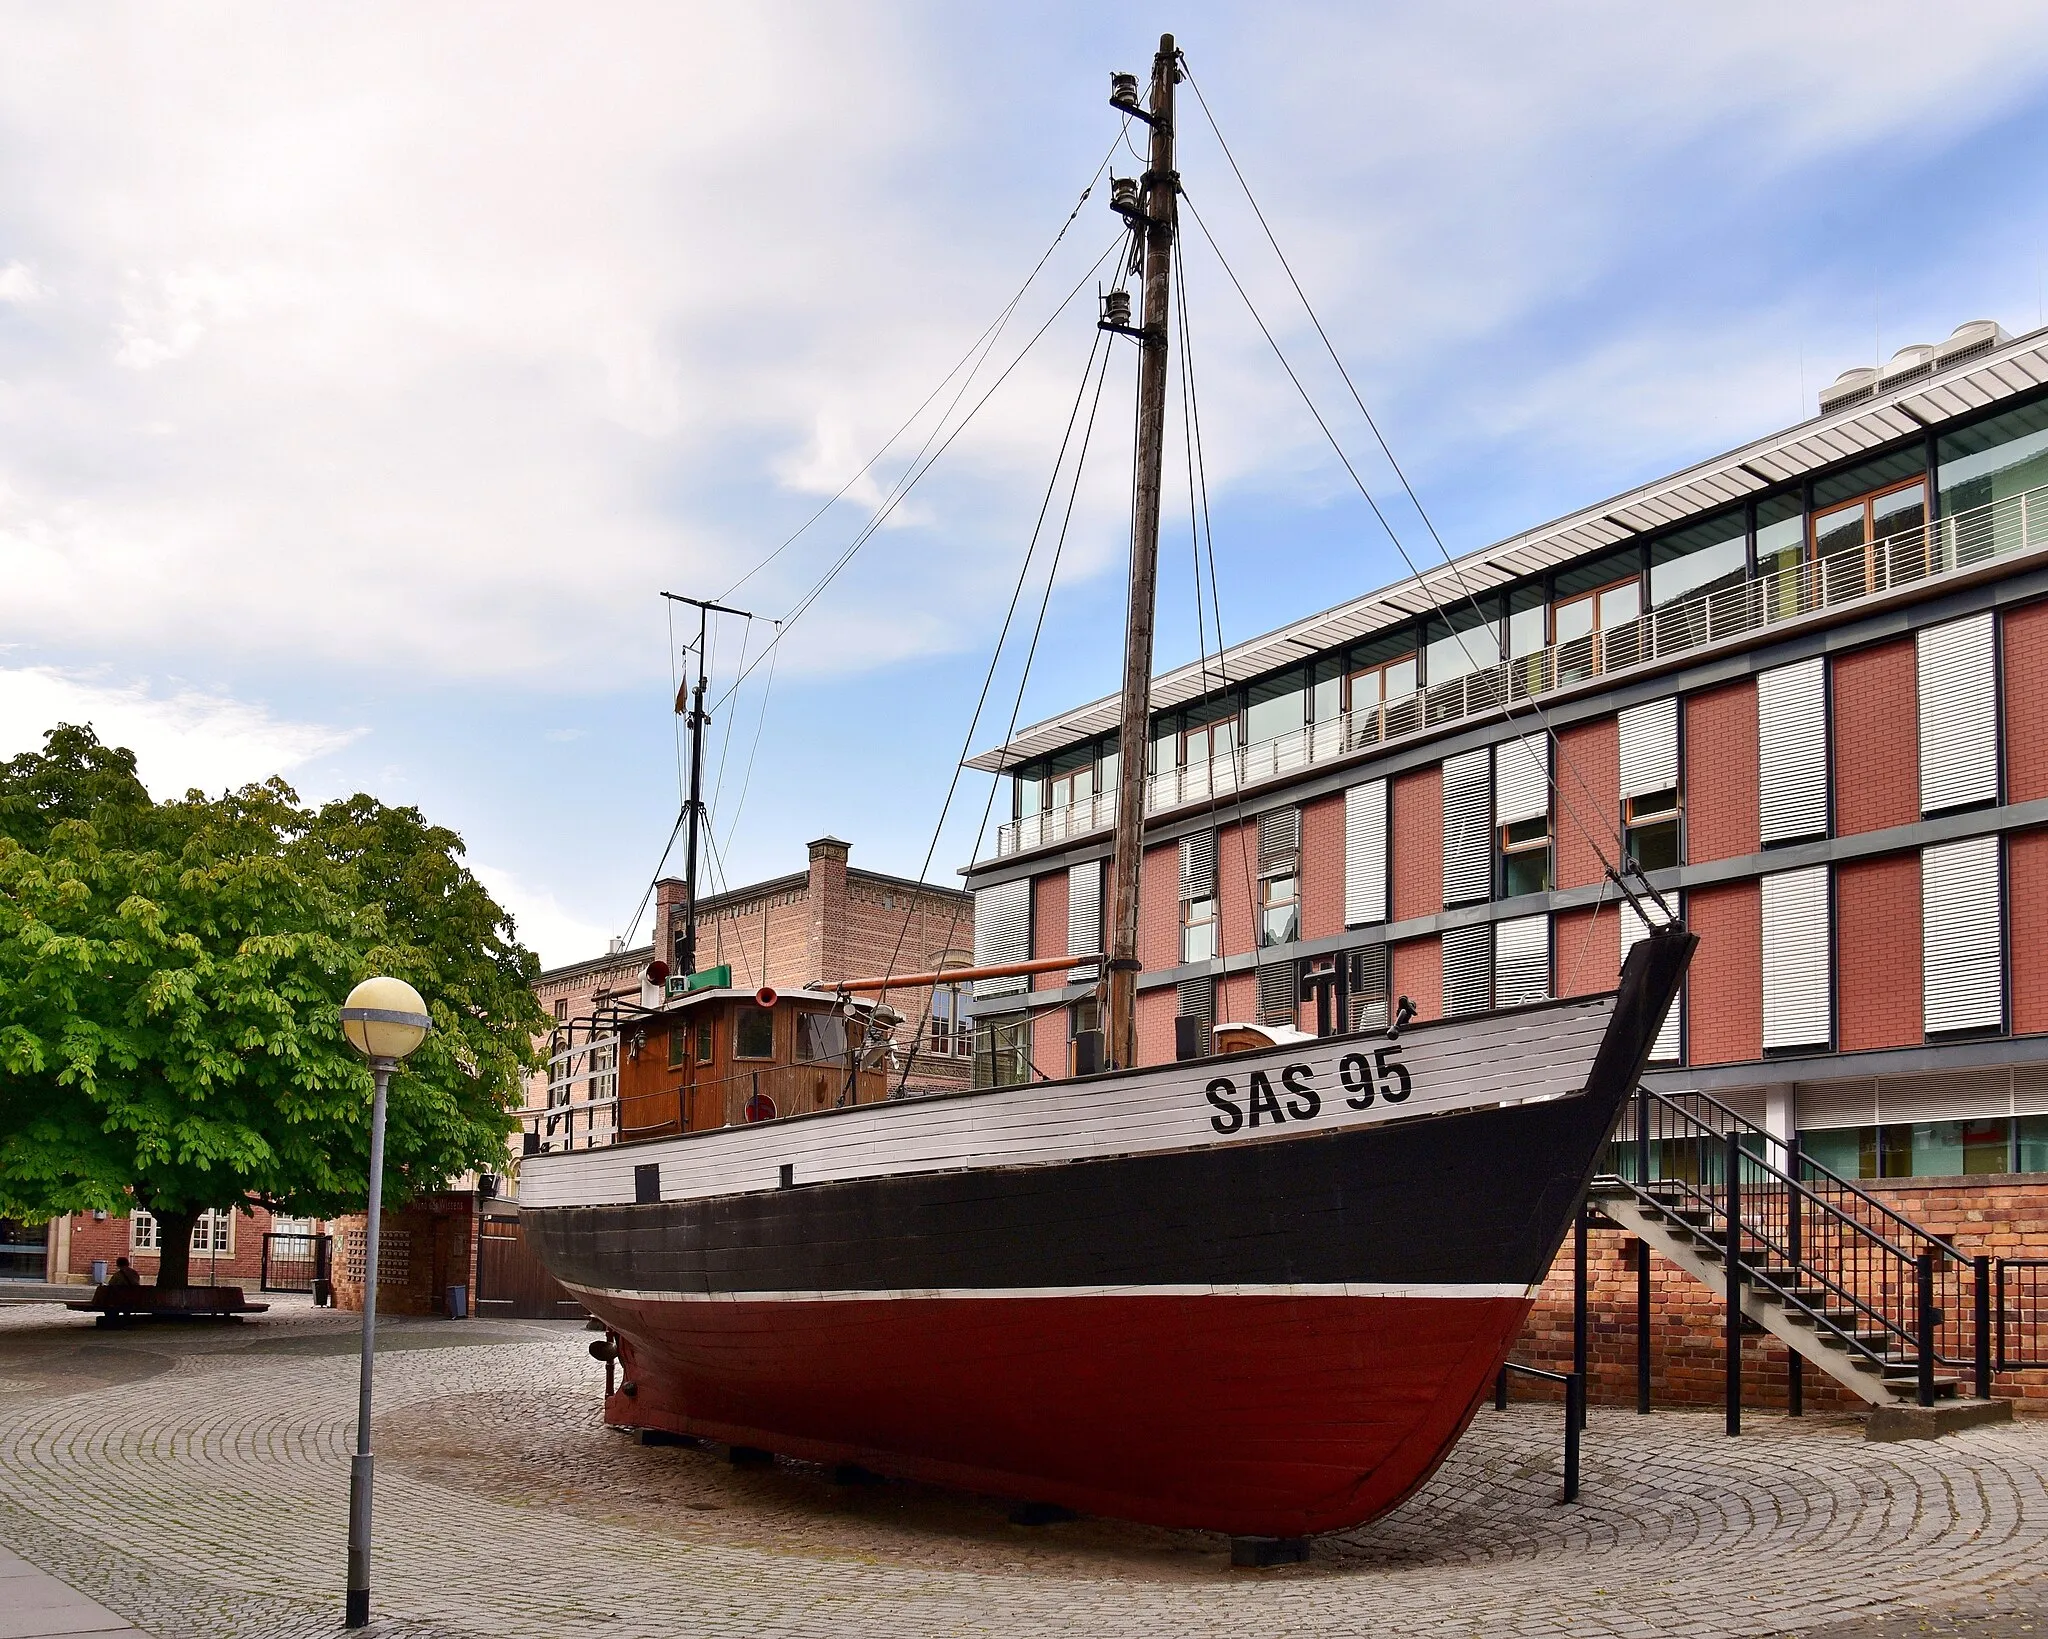 Photo showing: The former fishing boat Adolf Reichwein, on display at the German Oceanographic Museum, Stralsund, Germany